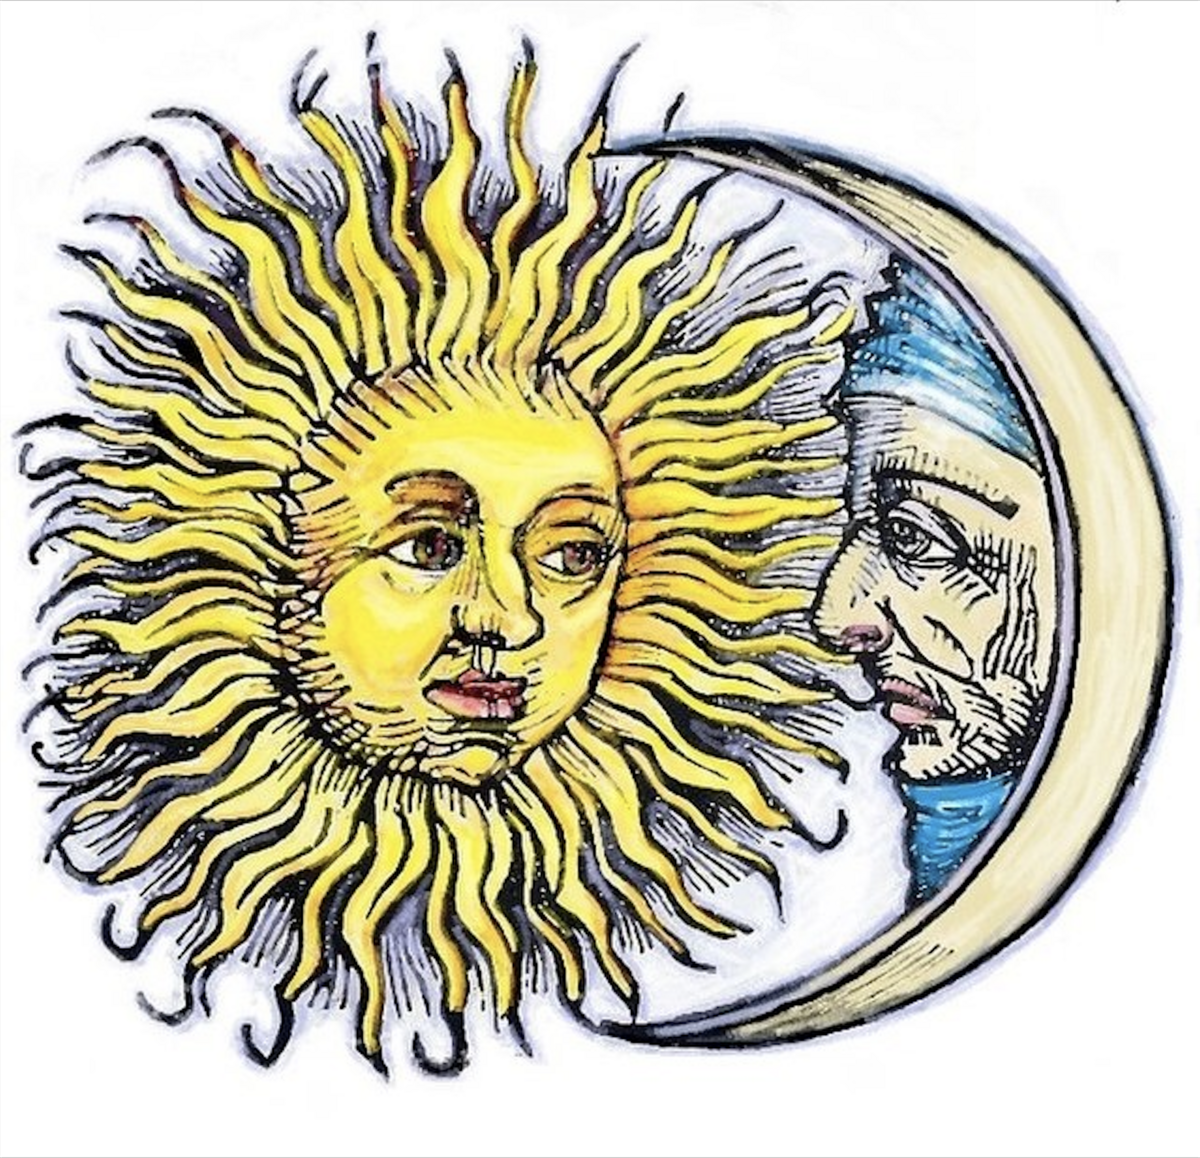 Art of a sun and a crescent moon with human faces looking at each other